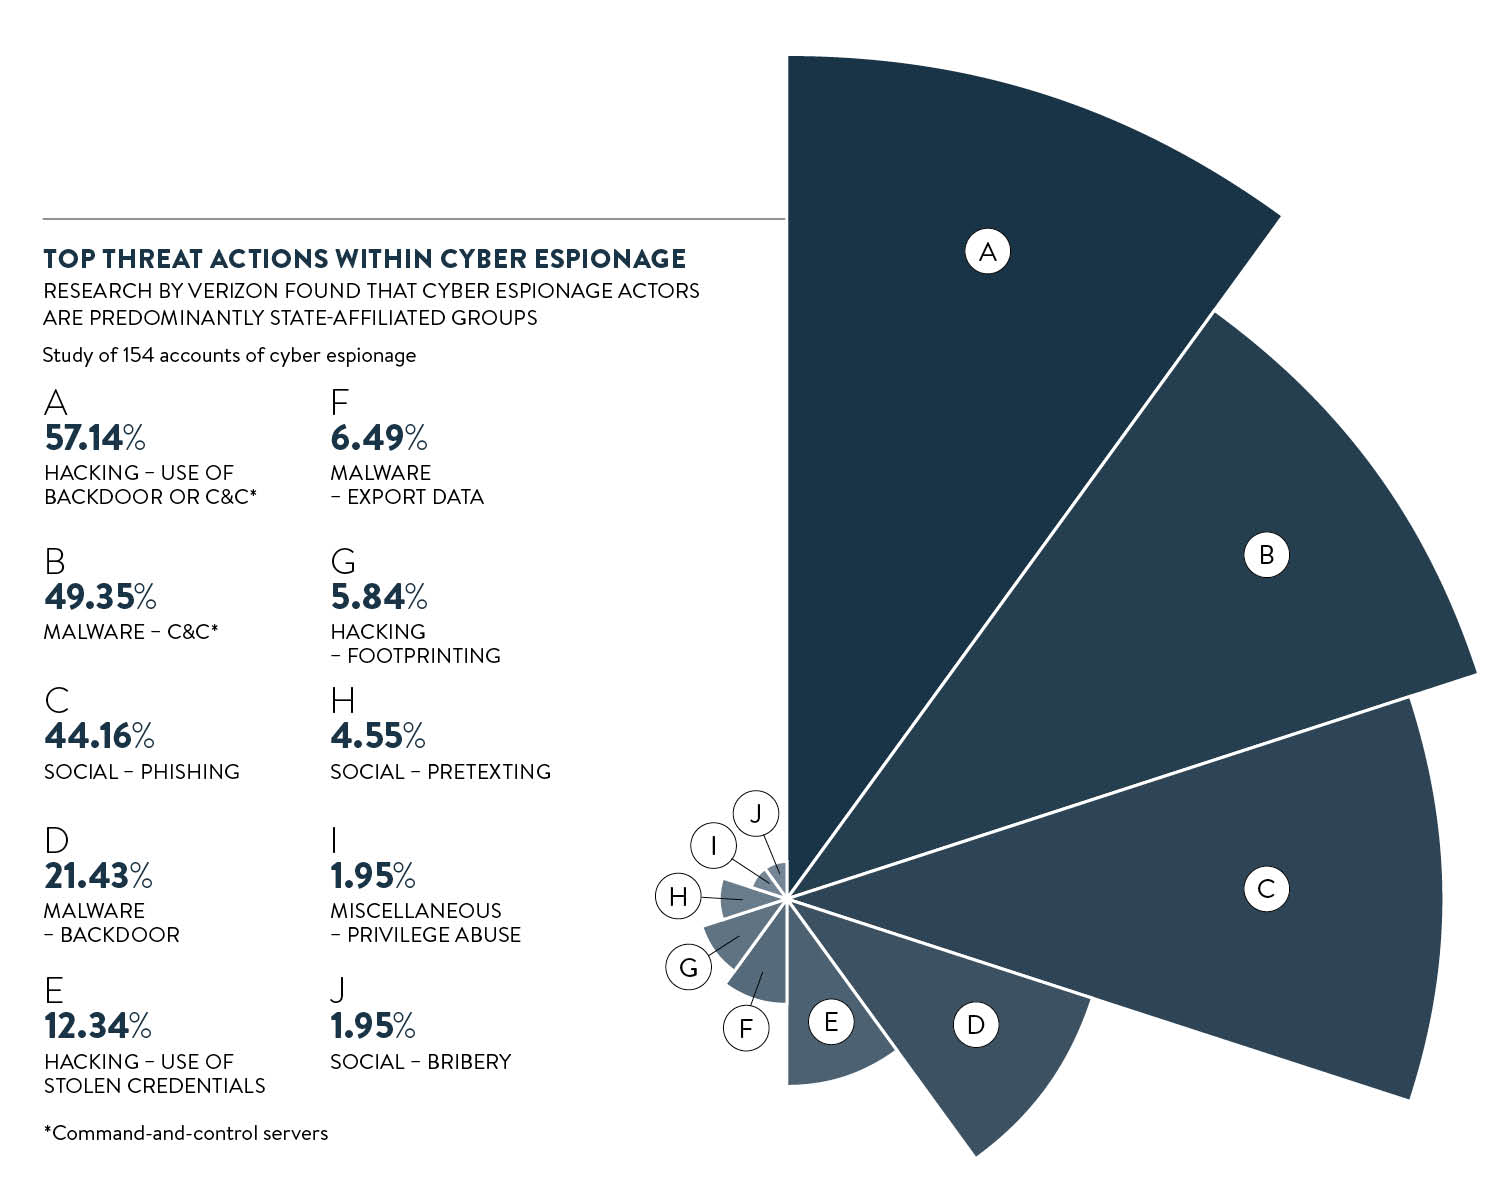 Top threat actions within cyber espionage